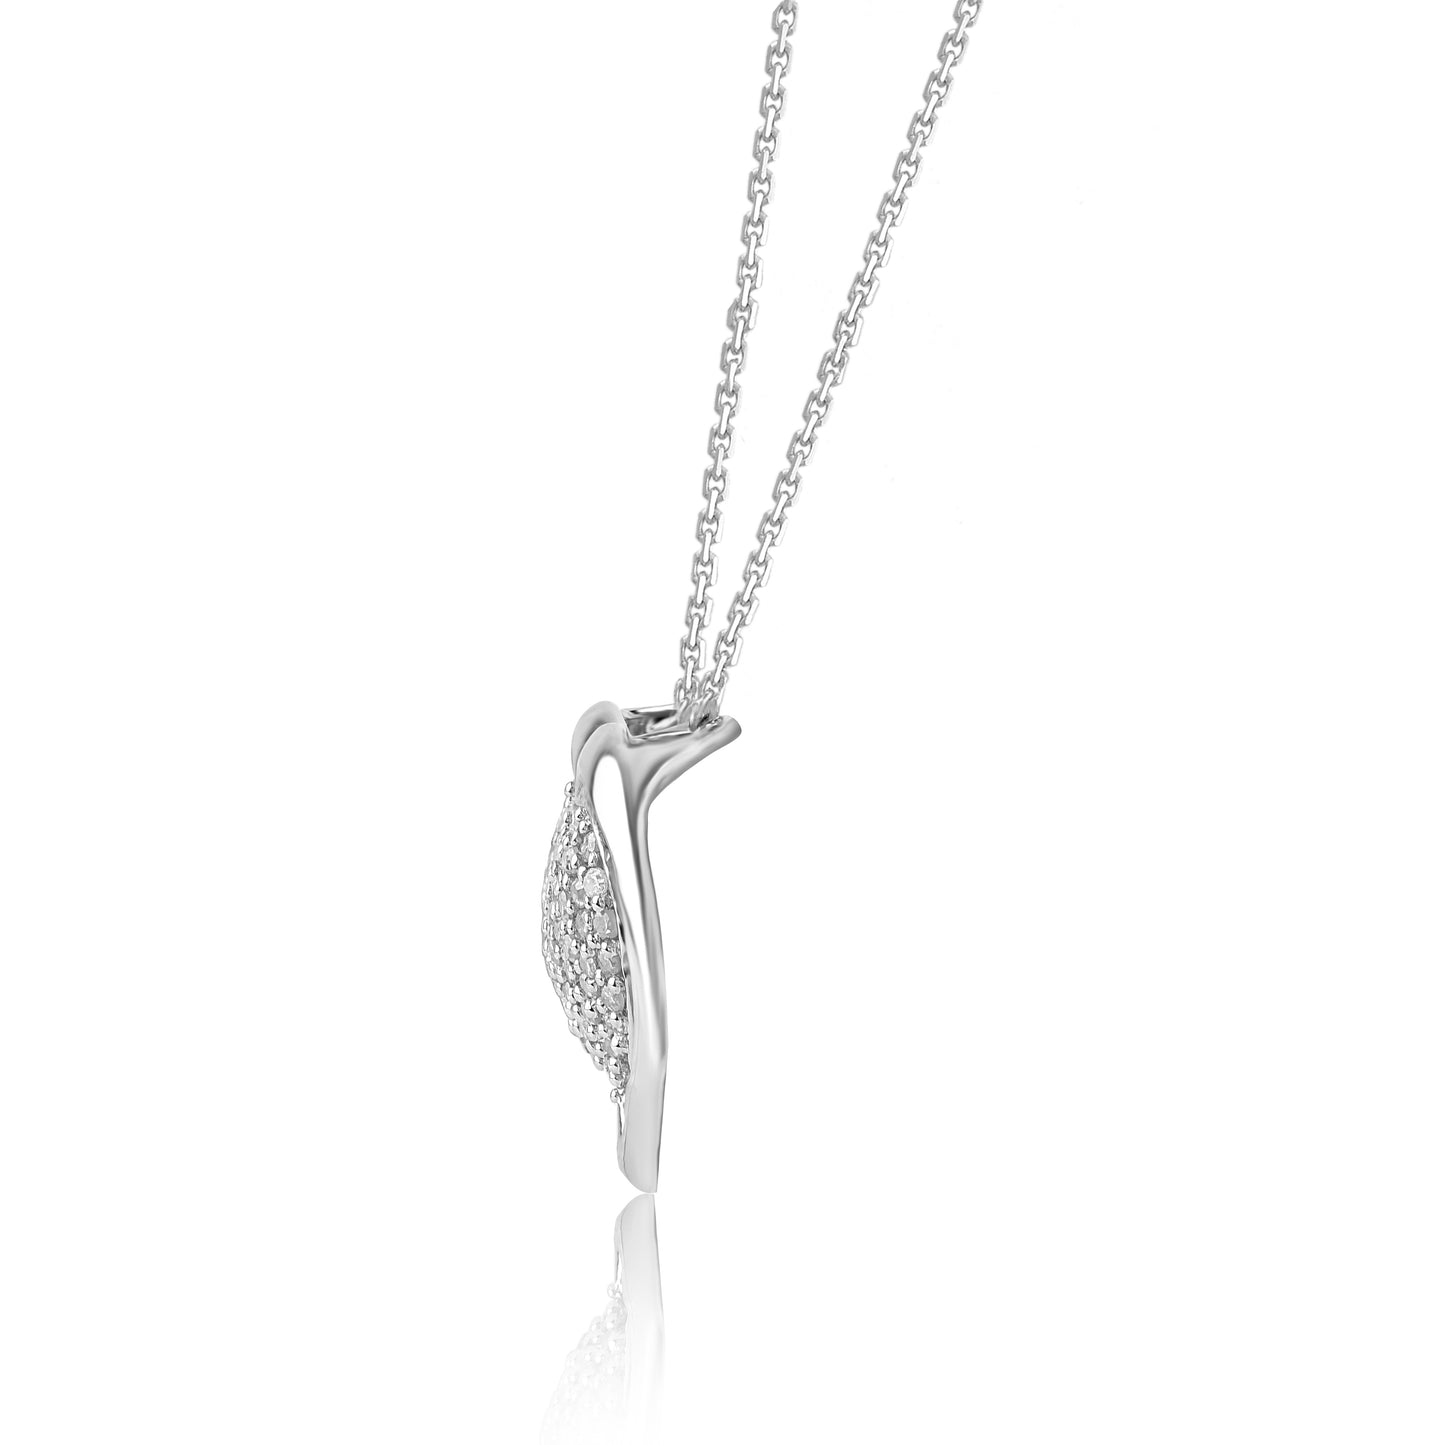 Pave Set Heart Pendant Necklace in 925 Sterling Silver